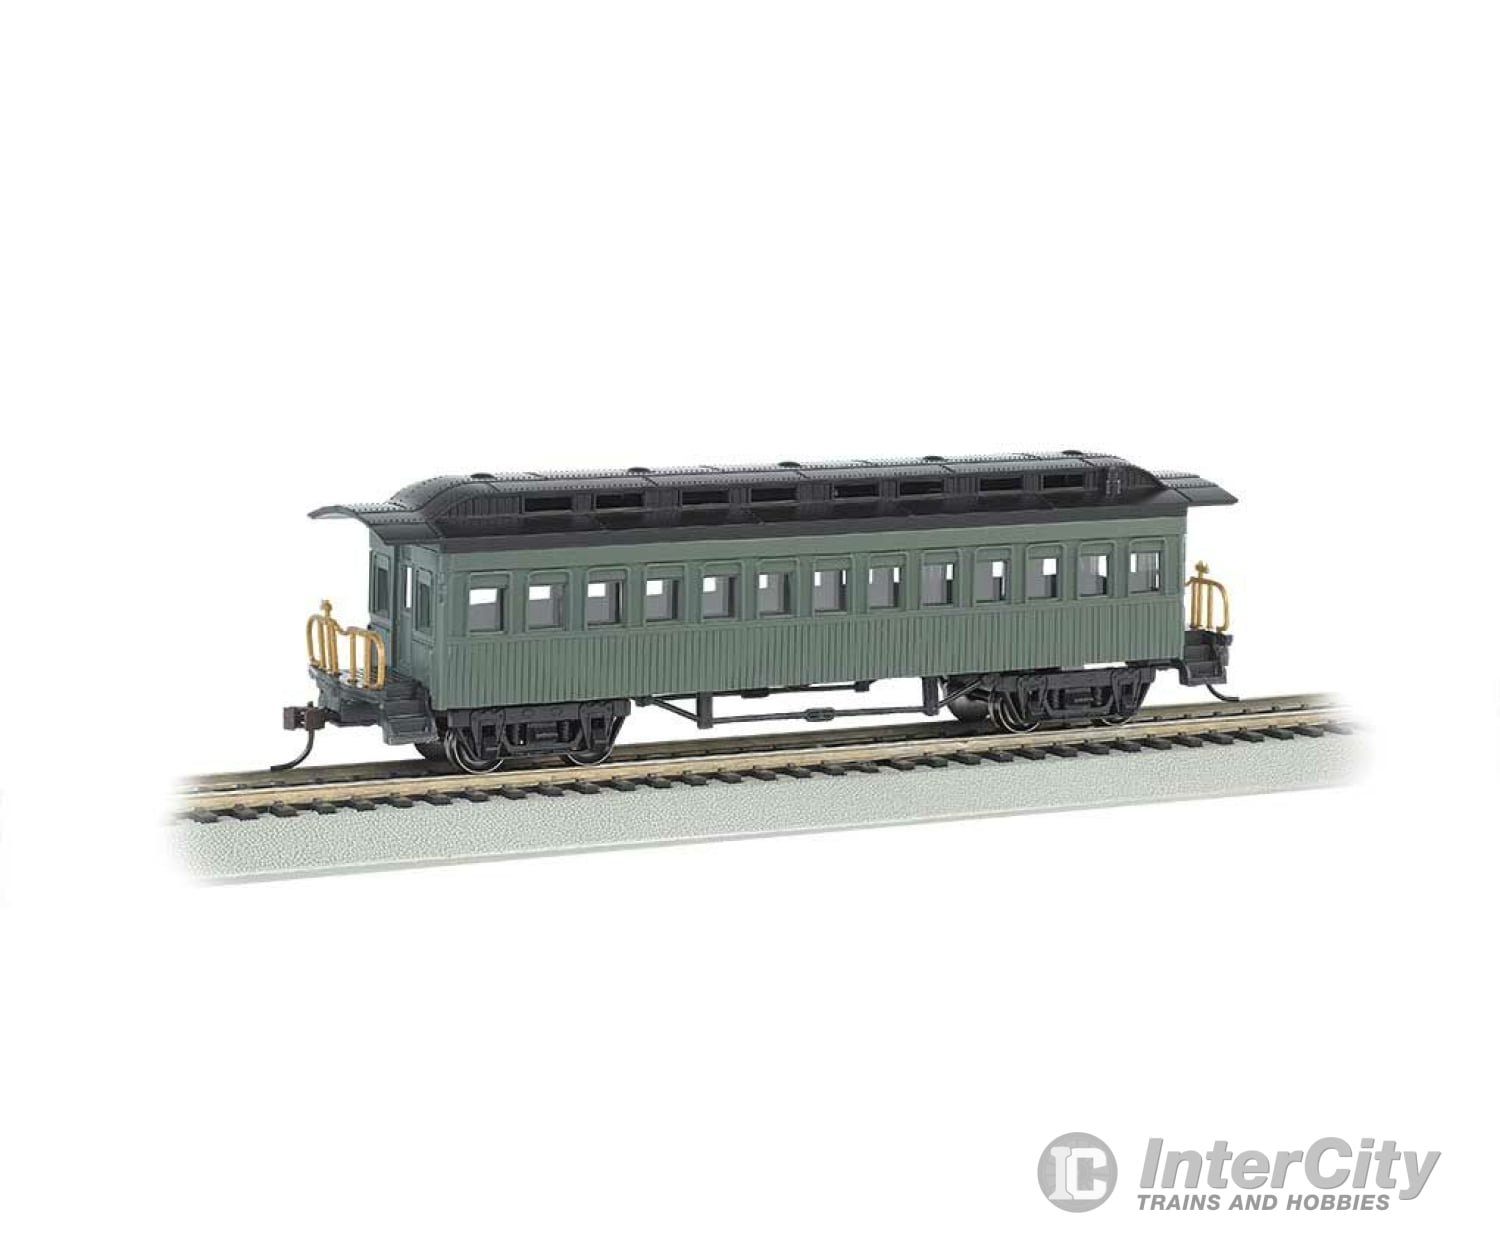 Bachmann 13405 1860 - 1880 Wood Coach Ready To Run Silver Series(R) -- Painted Unlettered (Green)